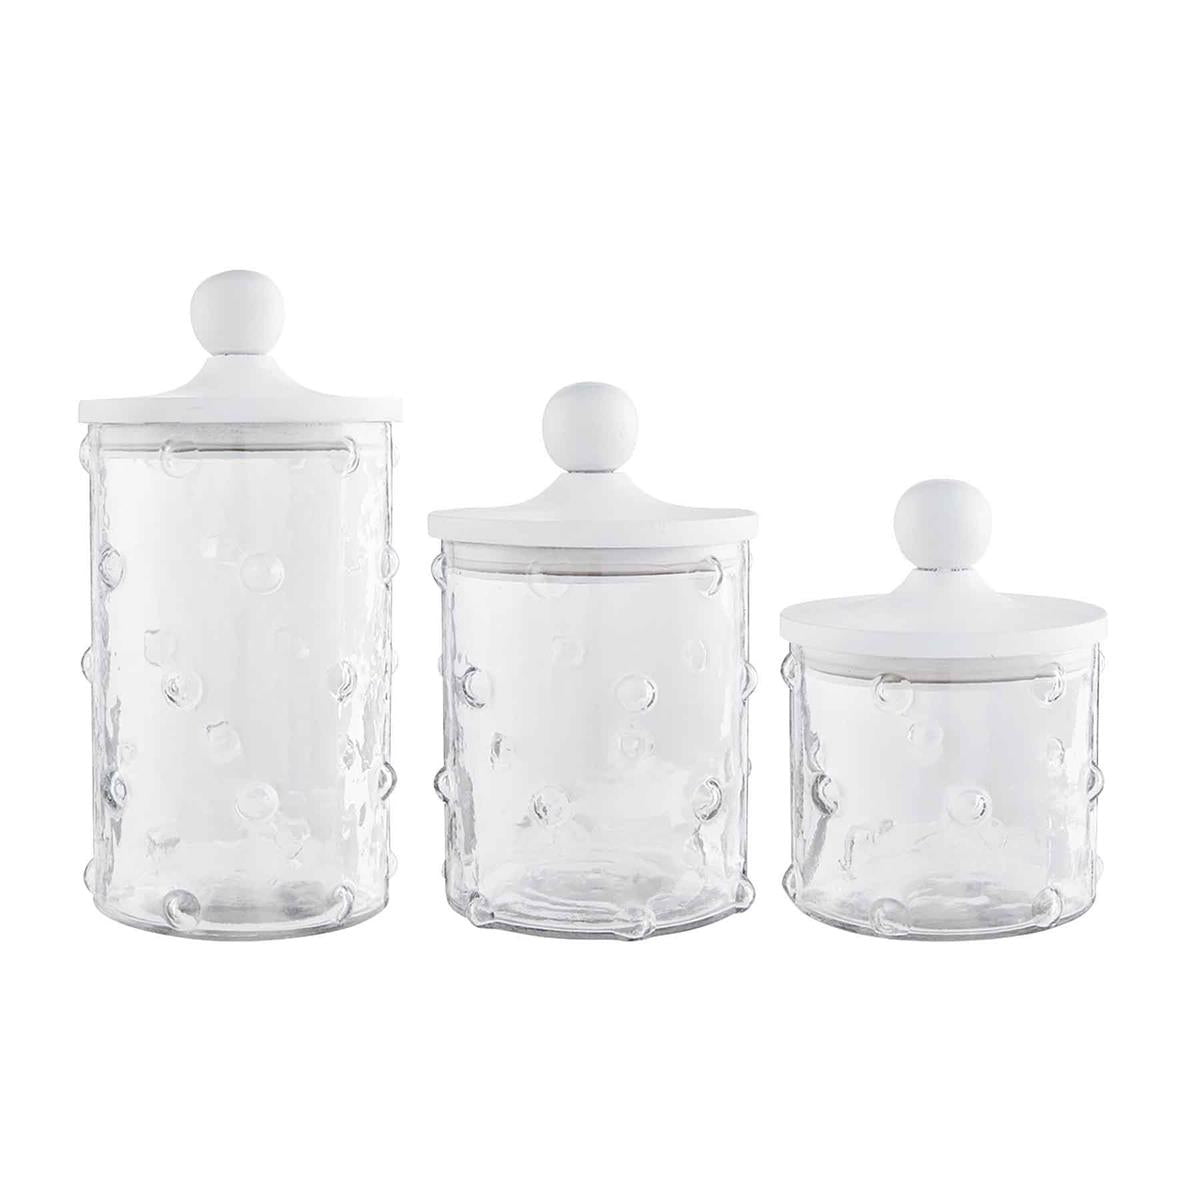 all three sizes of hobnail canisters are clear glass with glass dots and white wooden lids against a white background